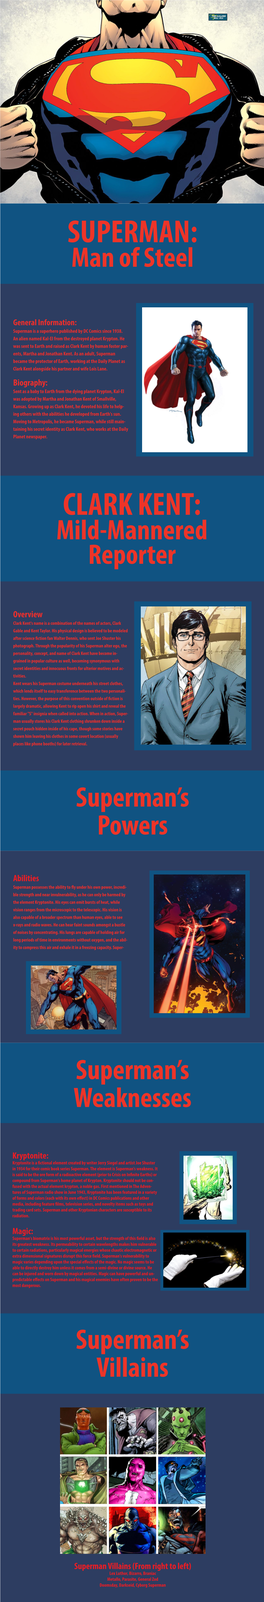 Superman Villains (From Right to Left) Biography: Overview Abilities